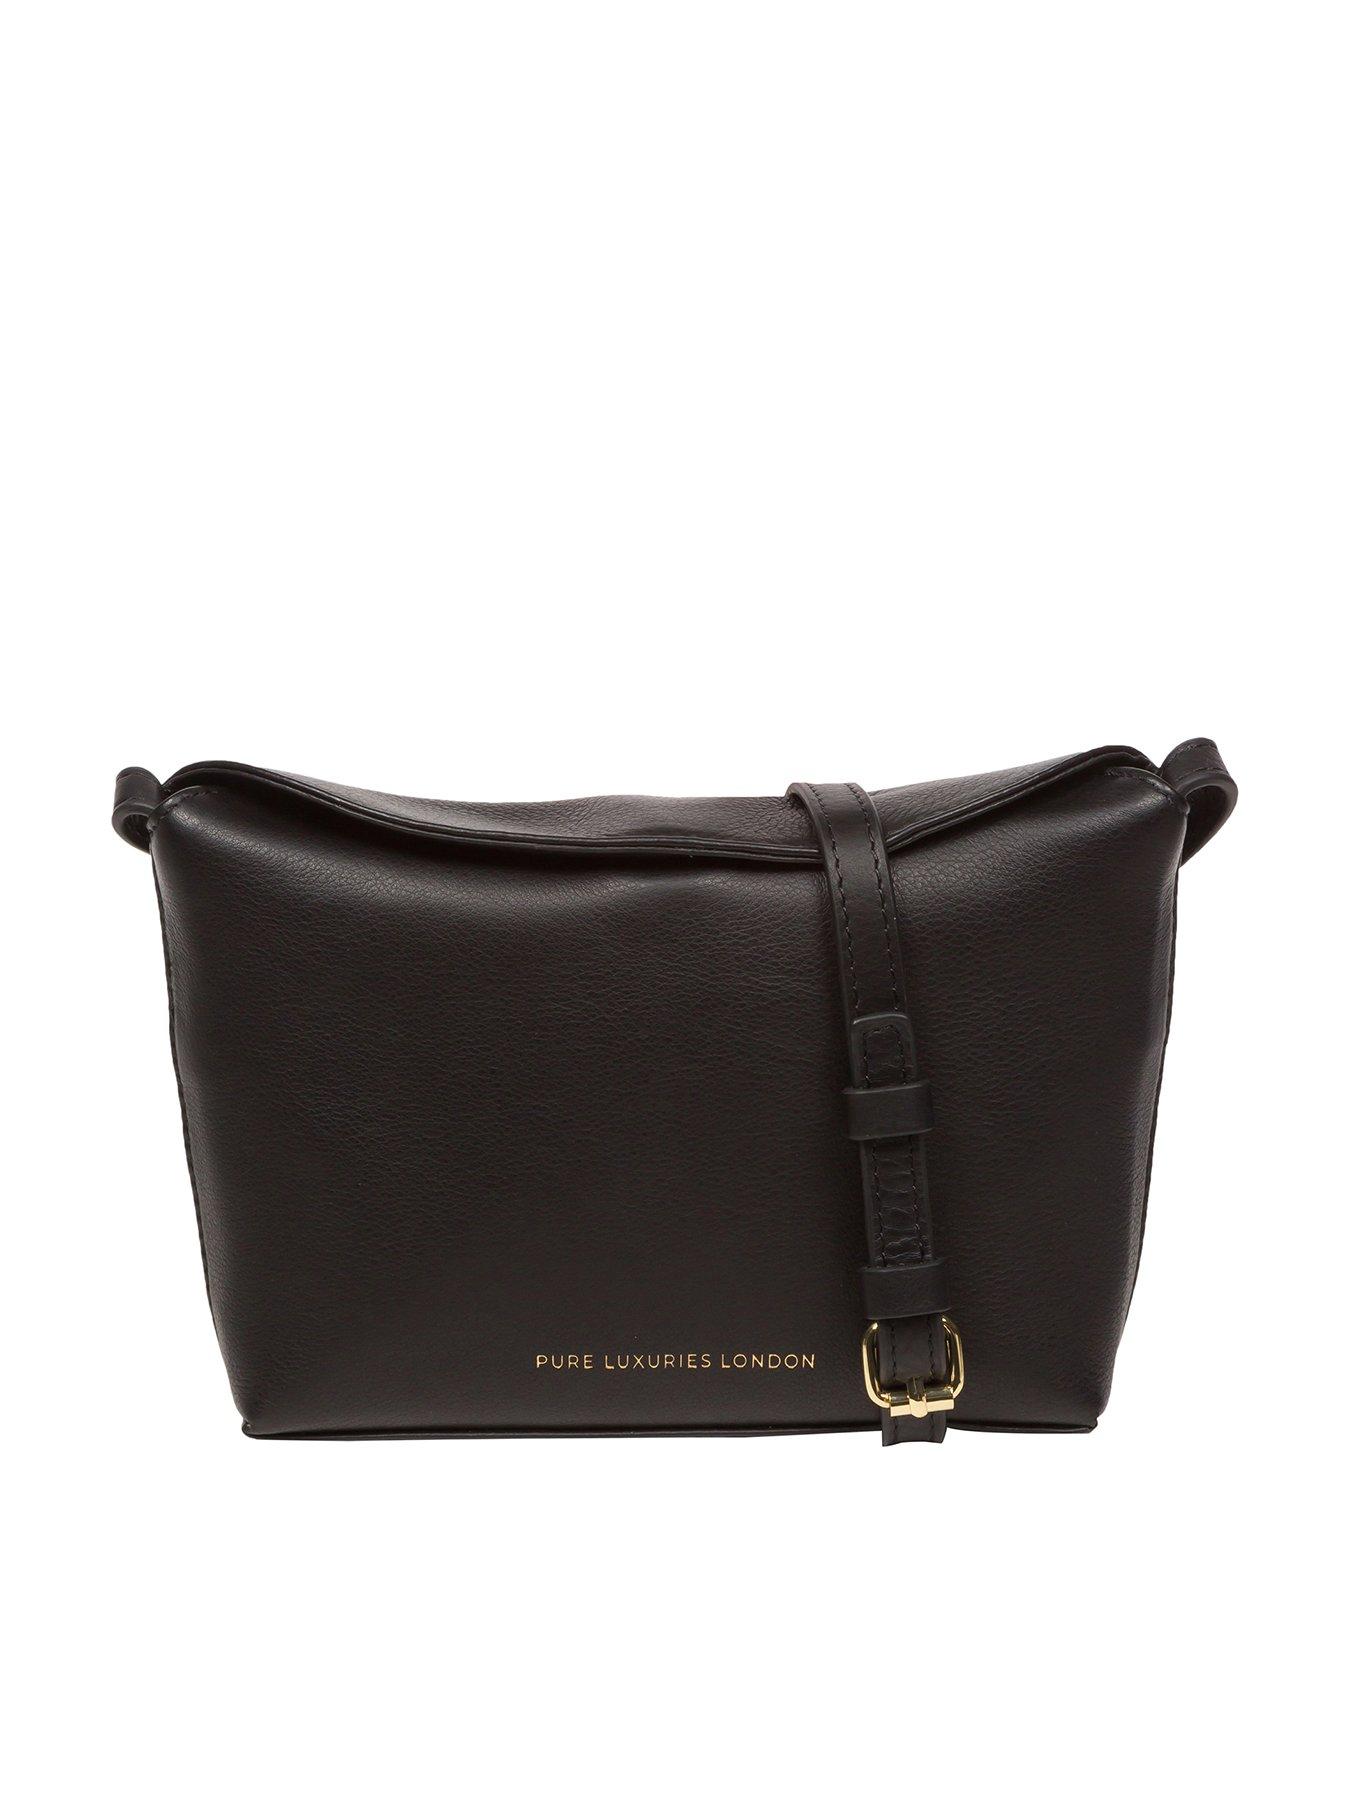 Buy Pure Luxuries London Sanderson Leather Messenger Bag from the